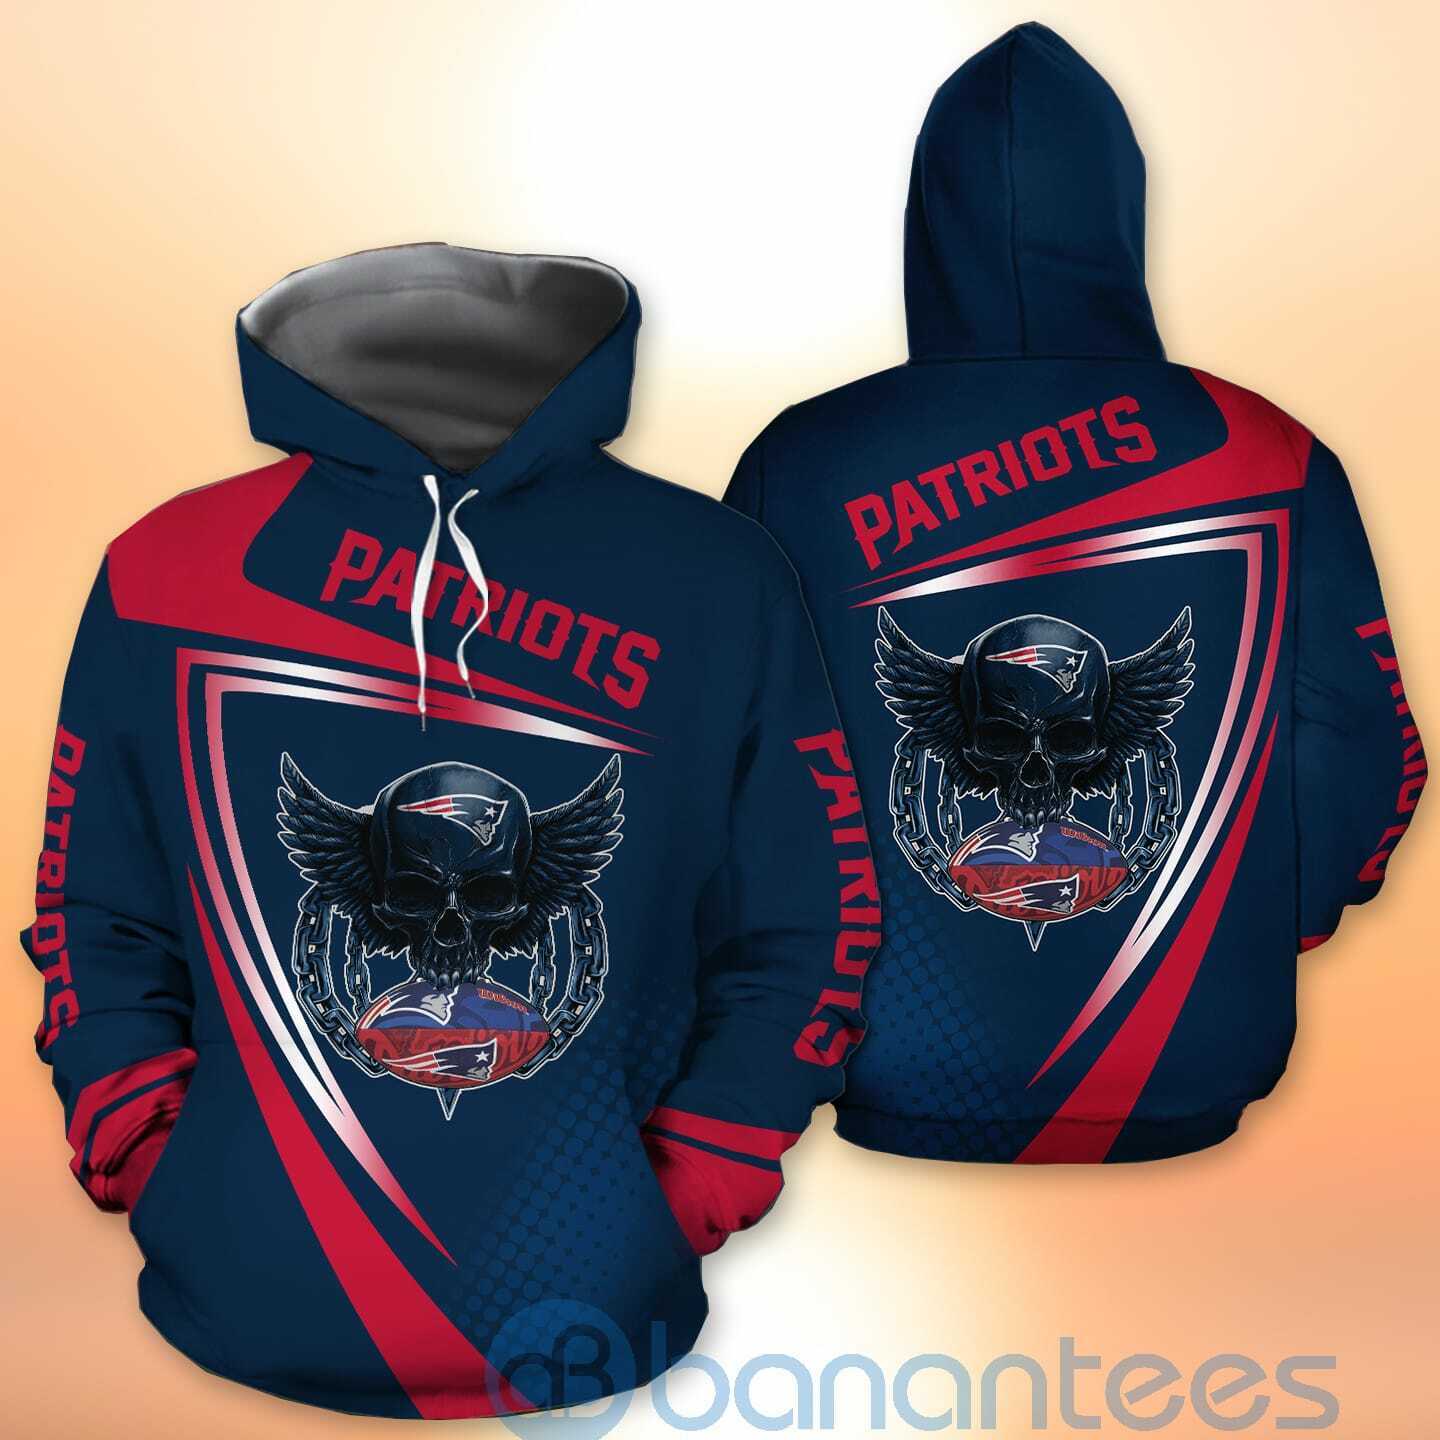 New England Patriots NFL Skull American Football Sporty Design 3D All Over Printed Shirt